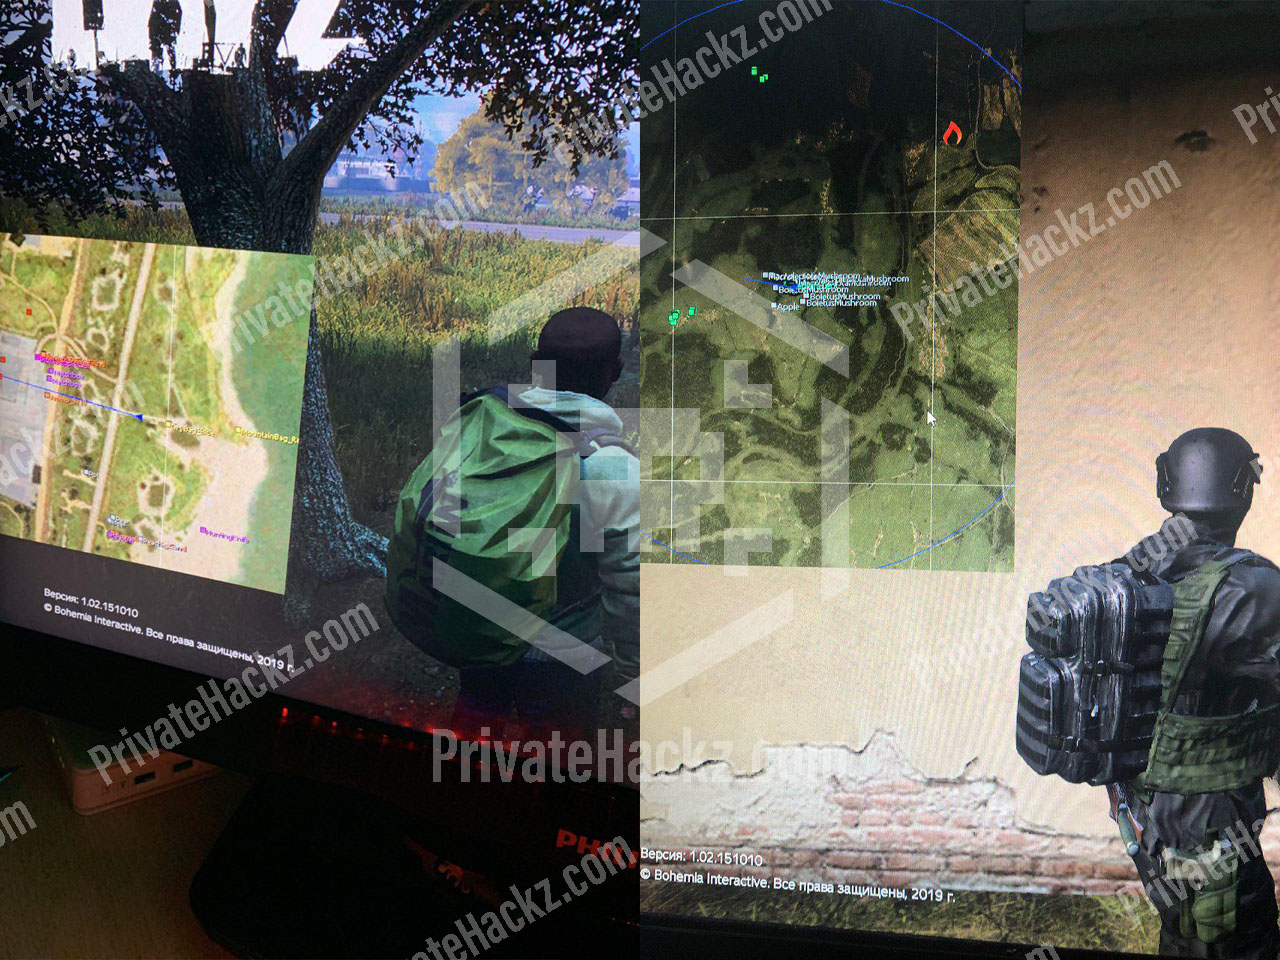 Buy private hacks for DayZ 1.0